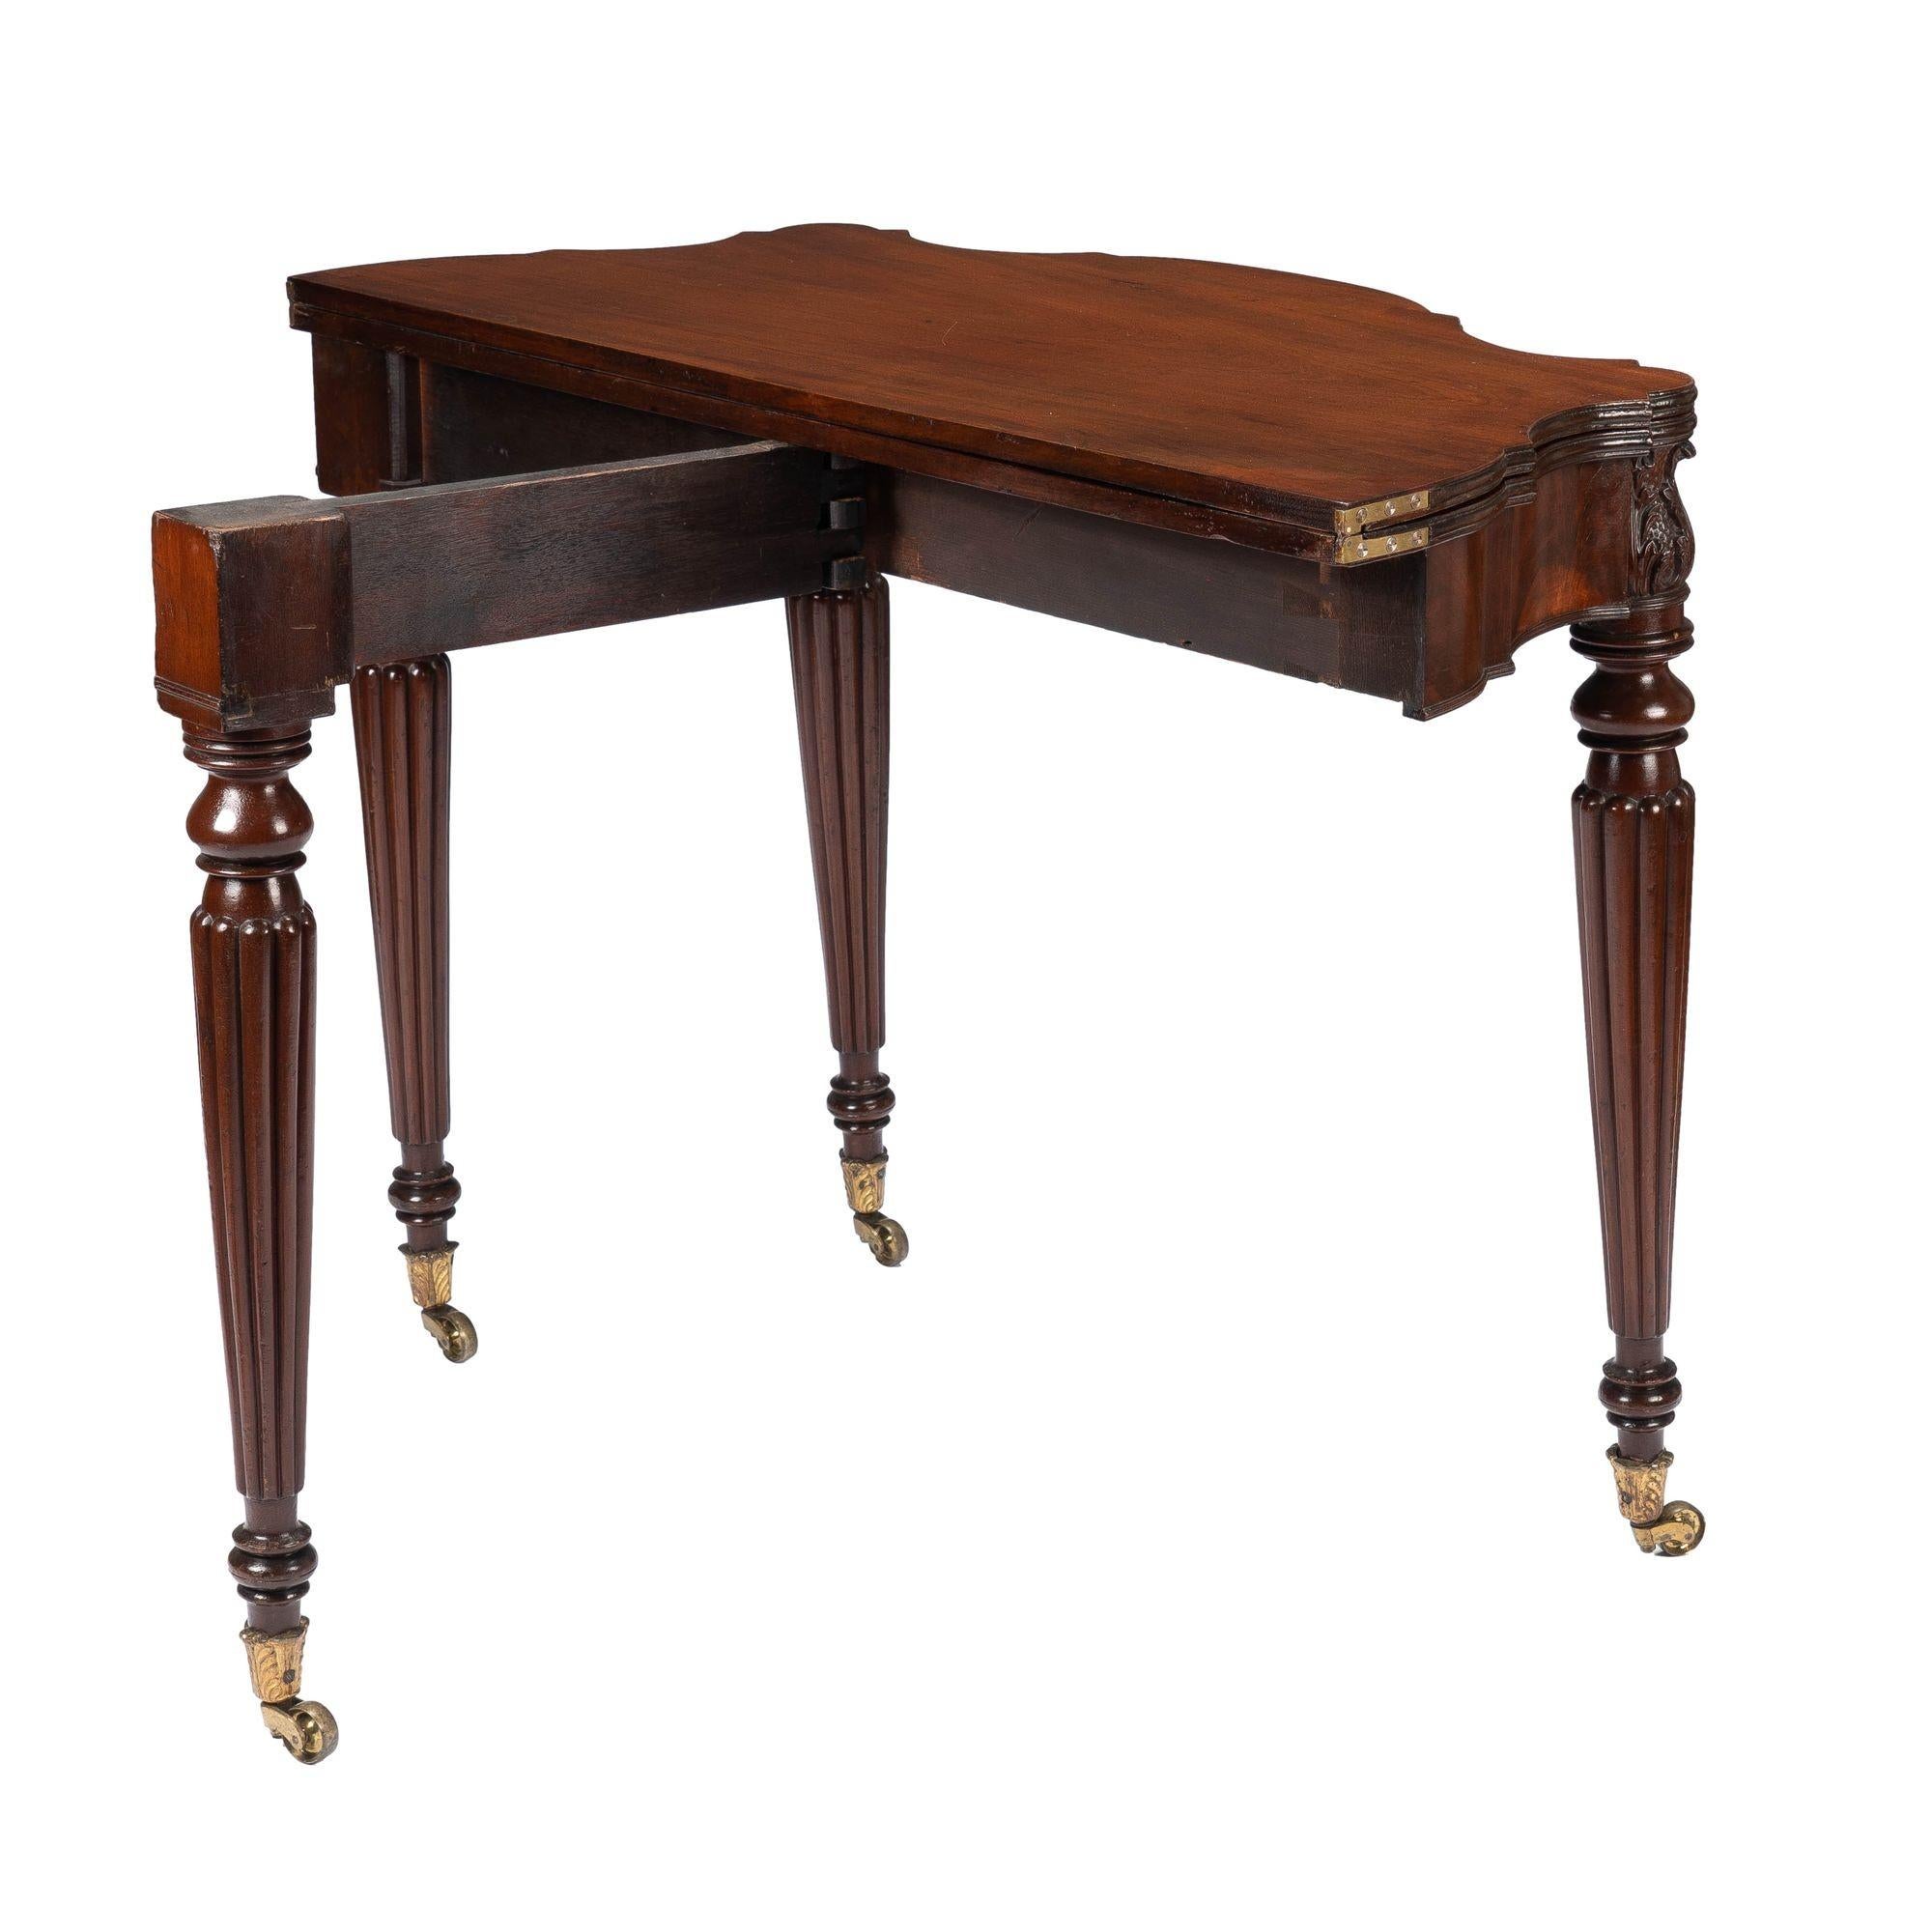 Samuel Field Macintire Attributed Mahogany Flip Top Game Table, c. 1810-15 For Sale 5